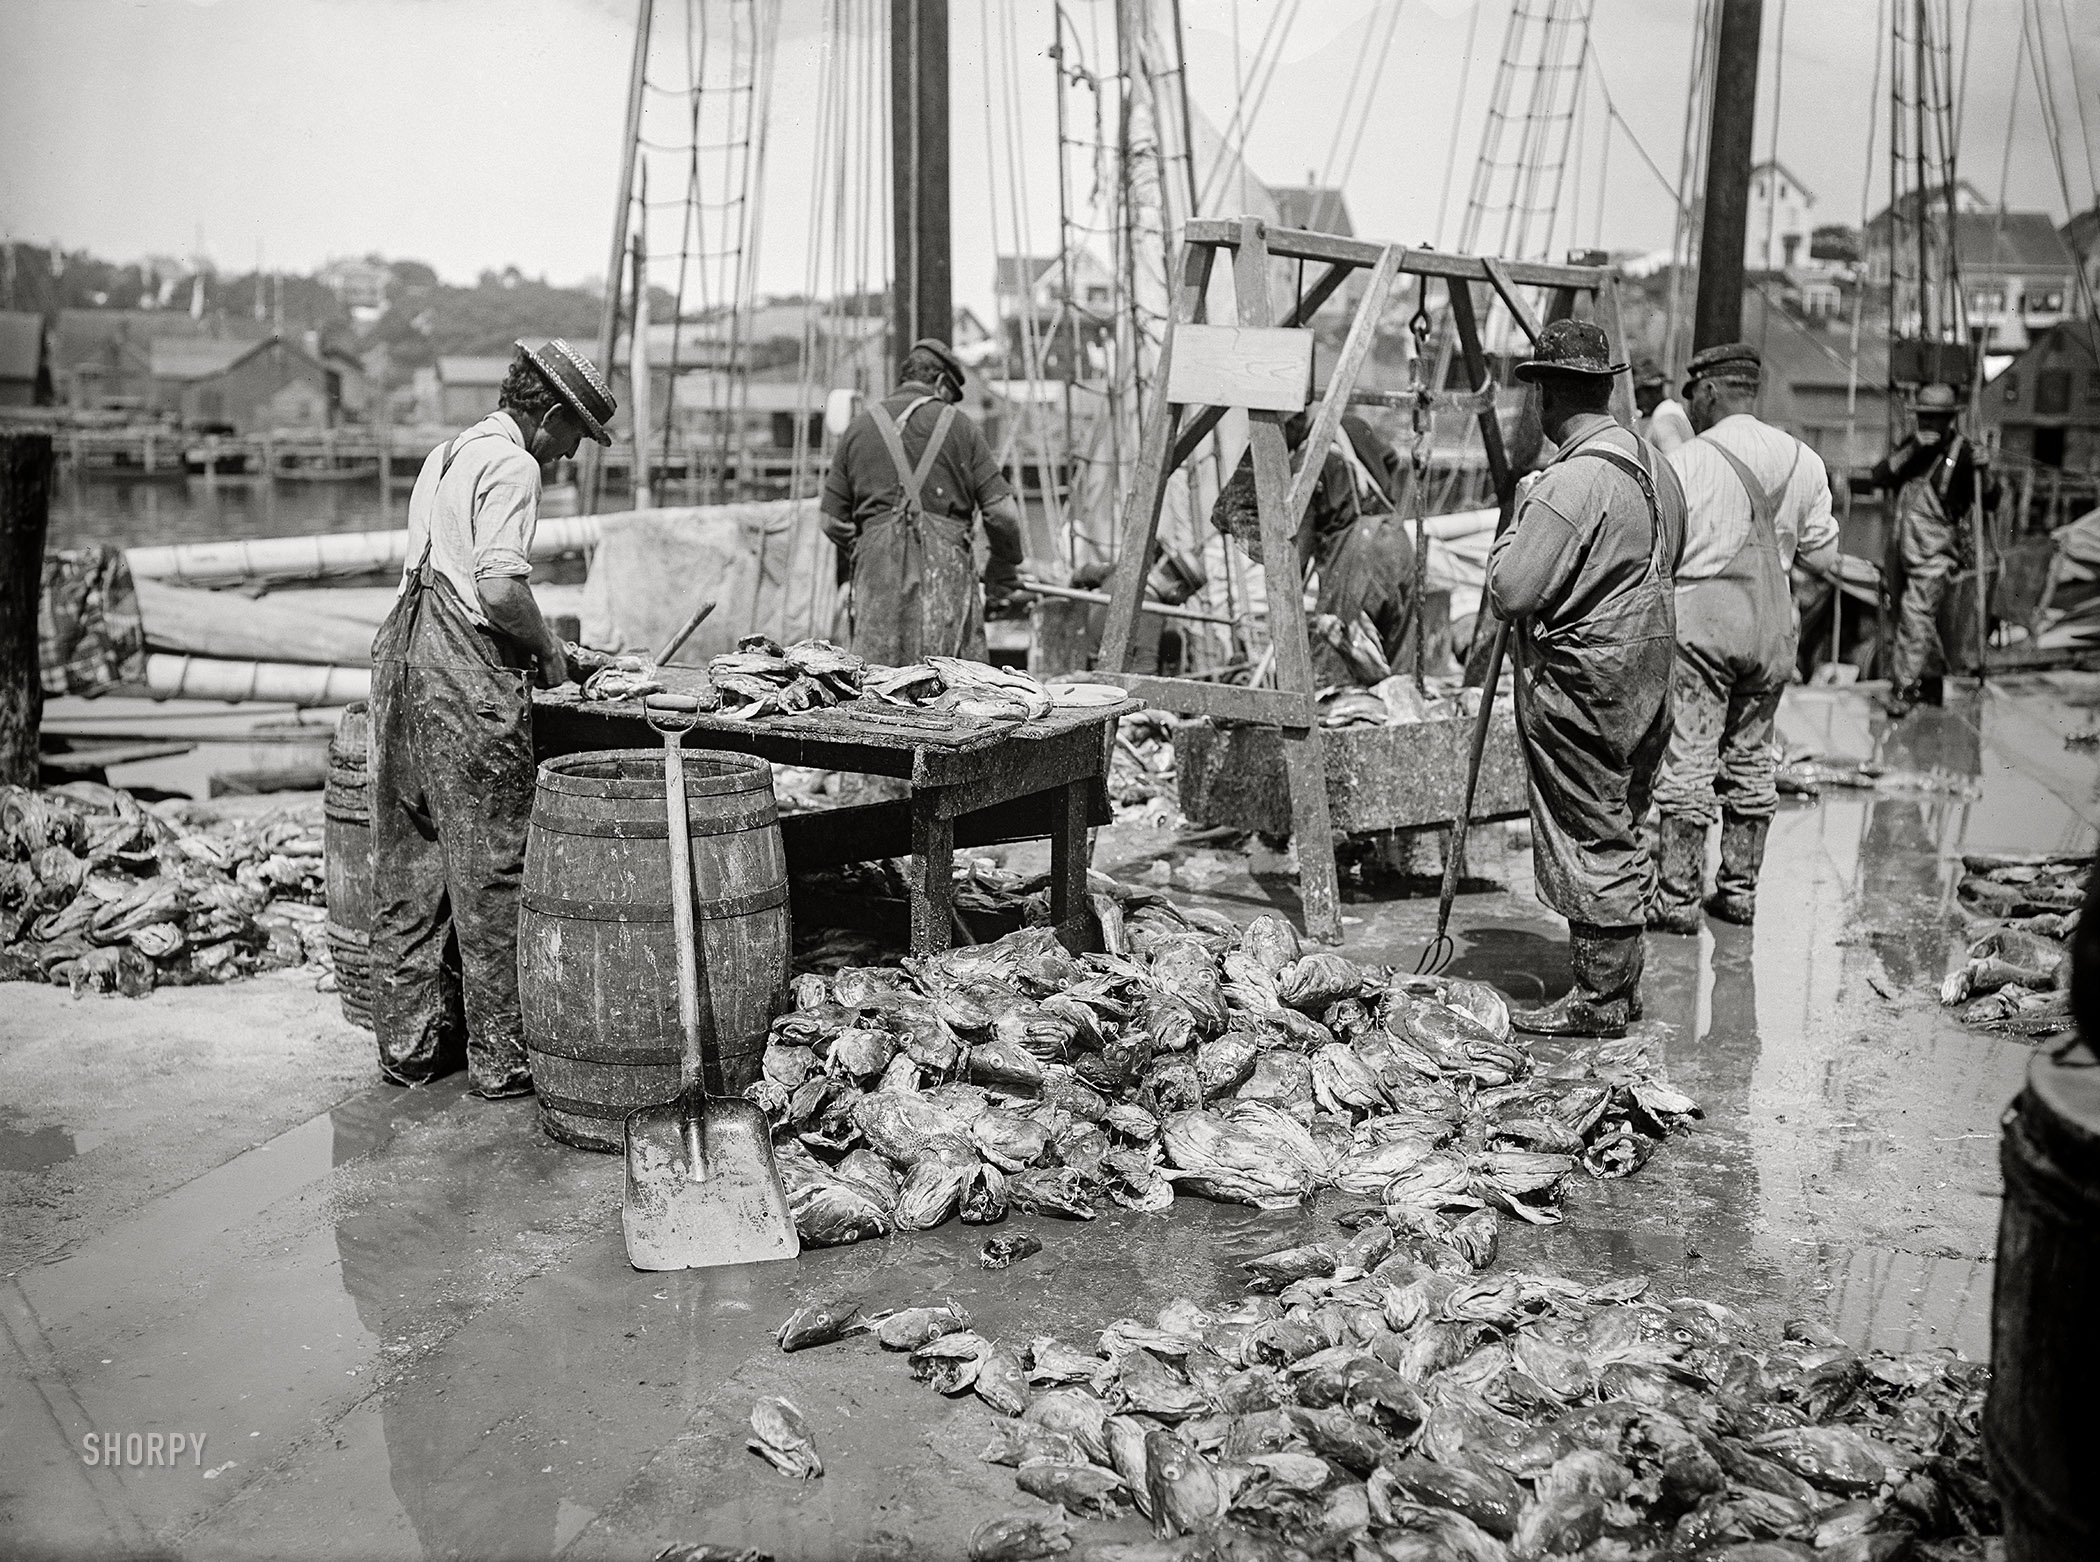 Gloucester, Massachusetts, circa 1905. "Cod -- weighing the catch." 5x7 inch dry plate glass negative, Detroit Publishing Company. View full size.